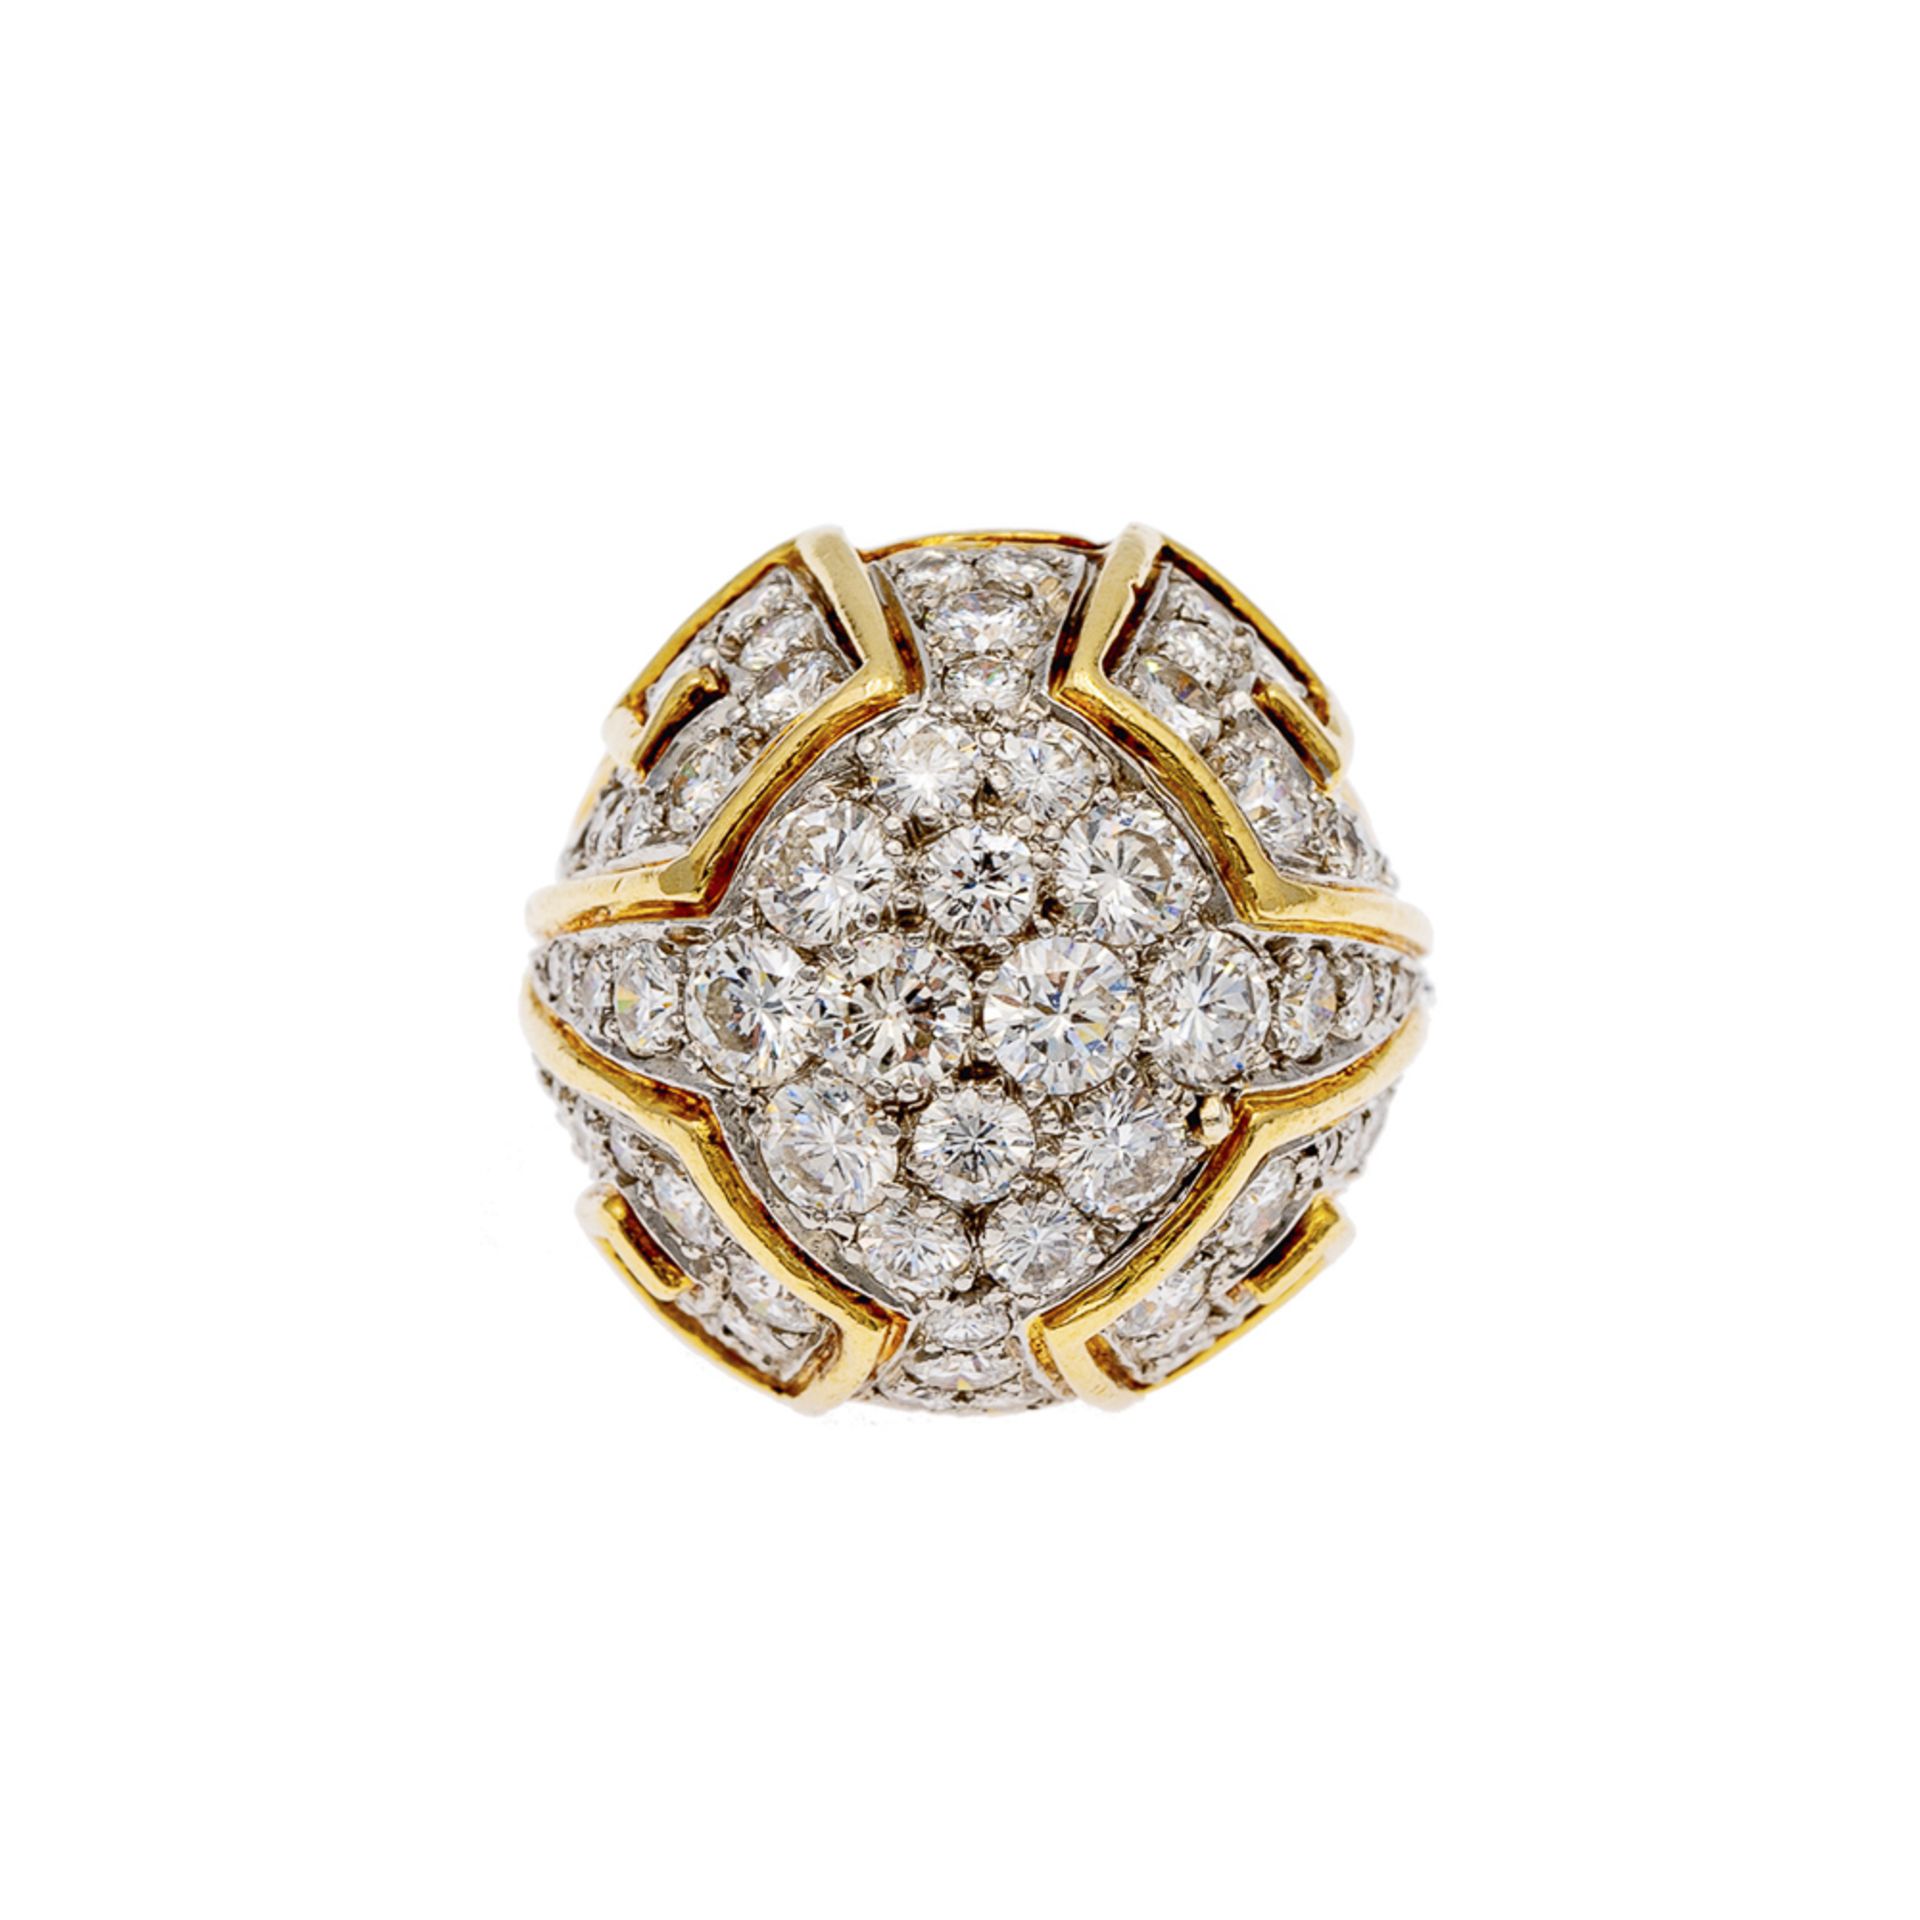 18kt yellow gold and diamonds Bombé ring - Image 2 of 2